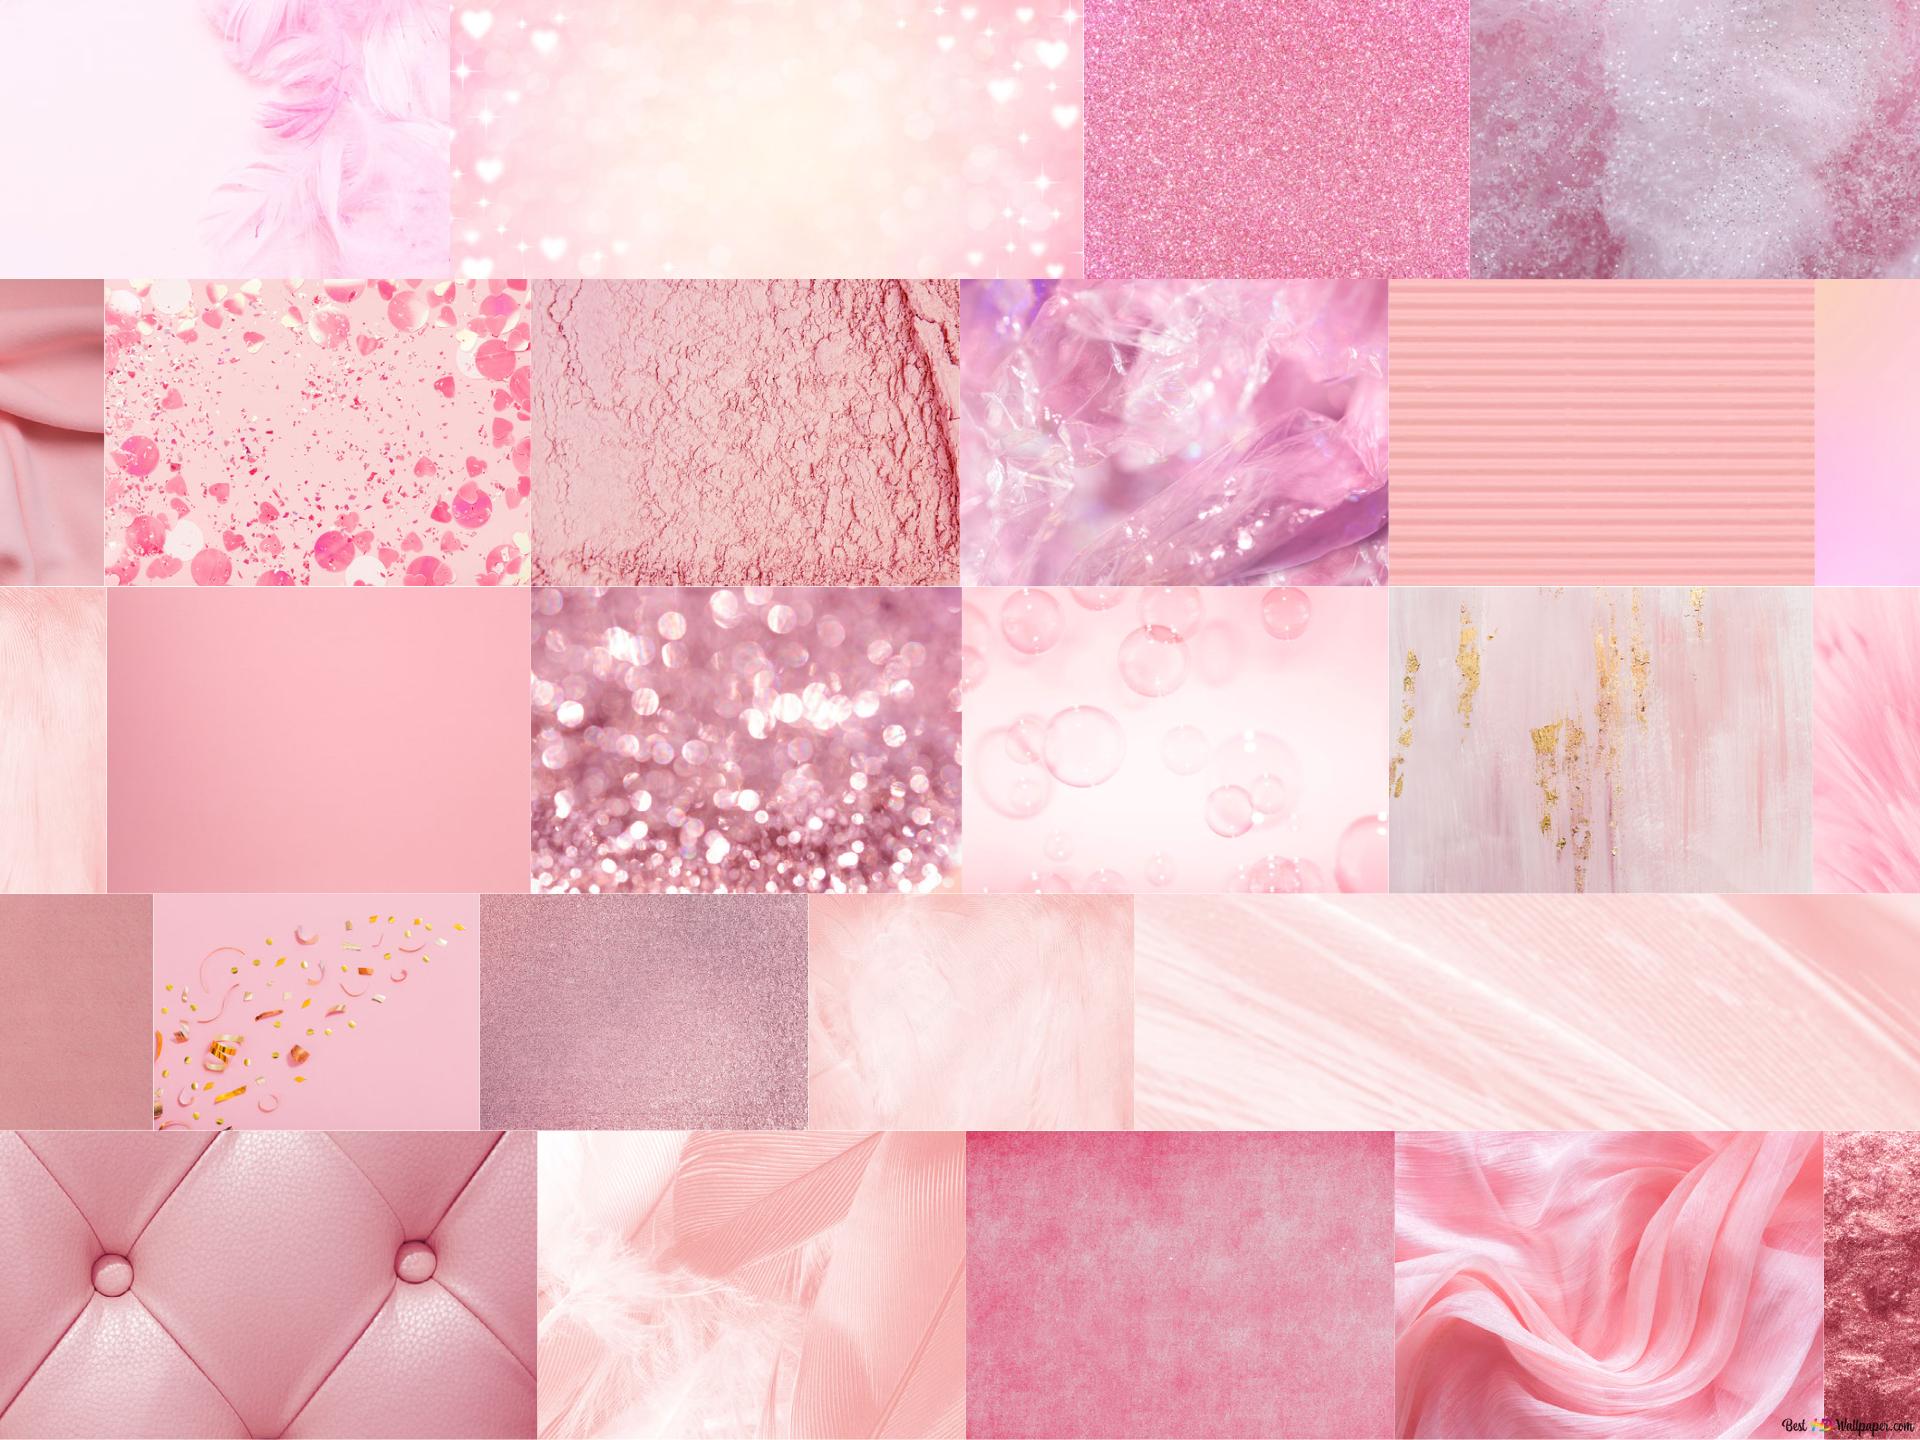 A collage of pink and white images - Soft pink